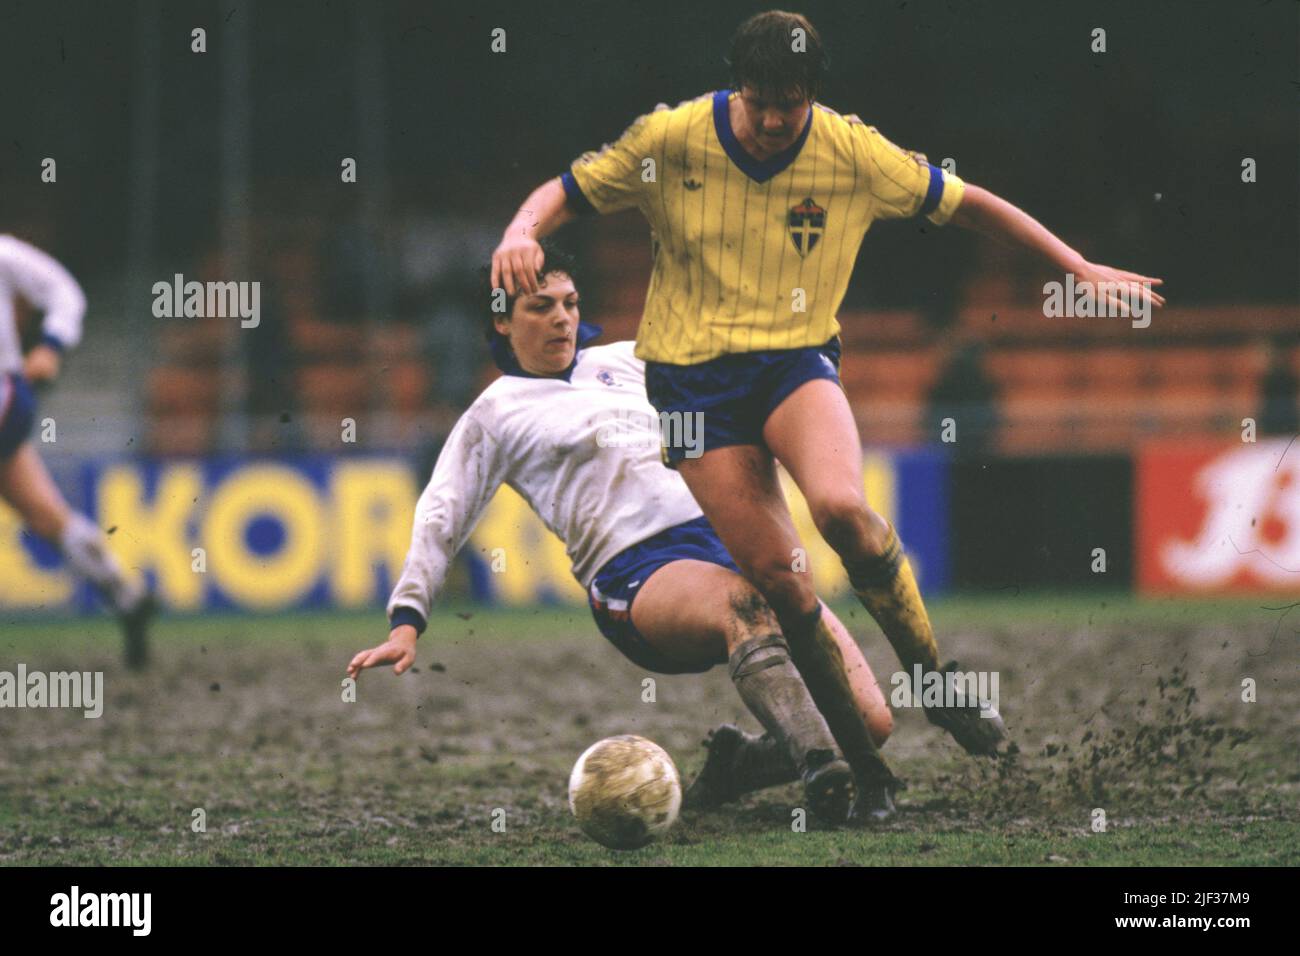 An England player tries a sliding tackle to win possession. Stock Photo